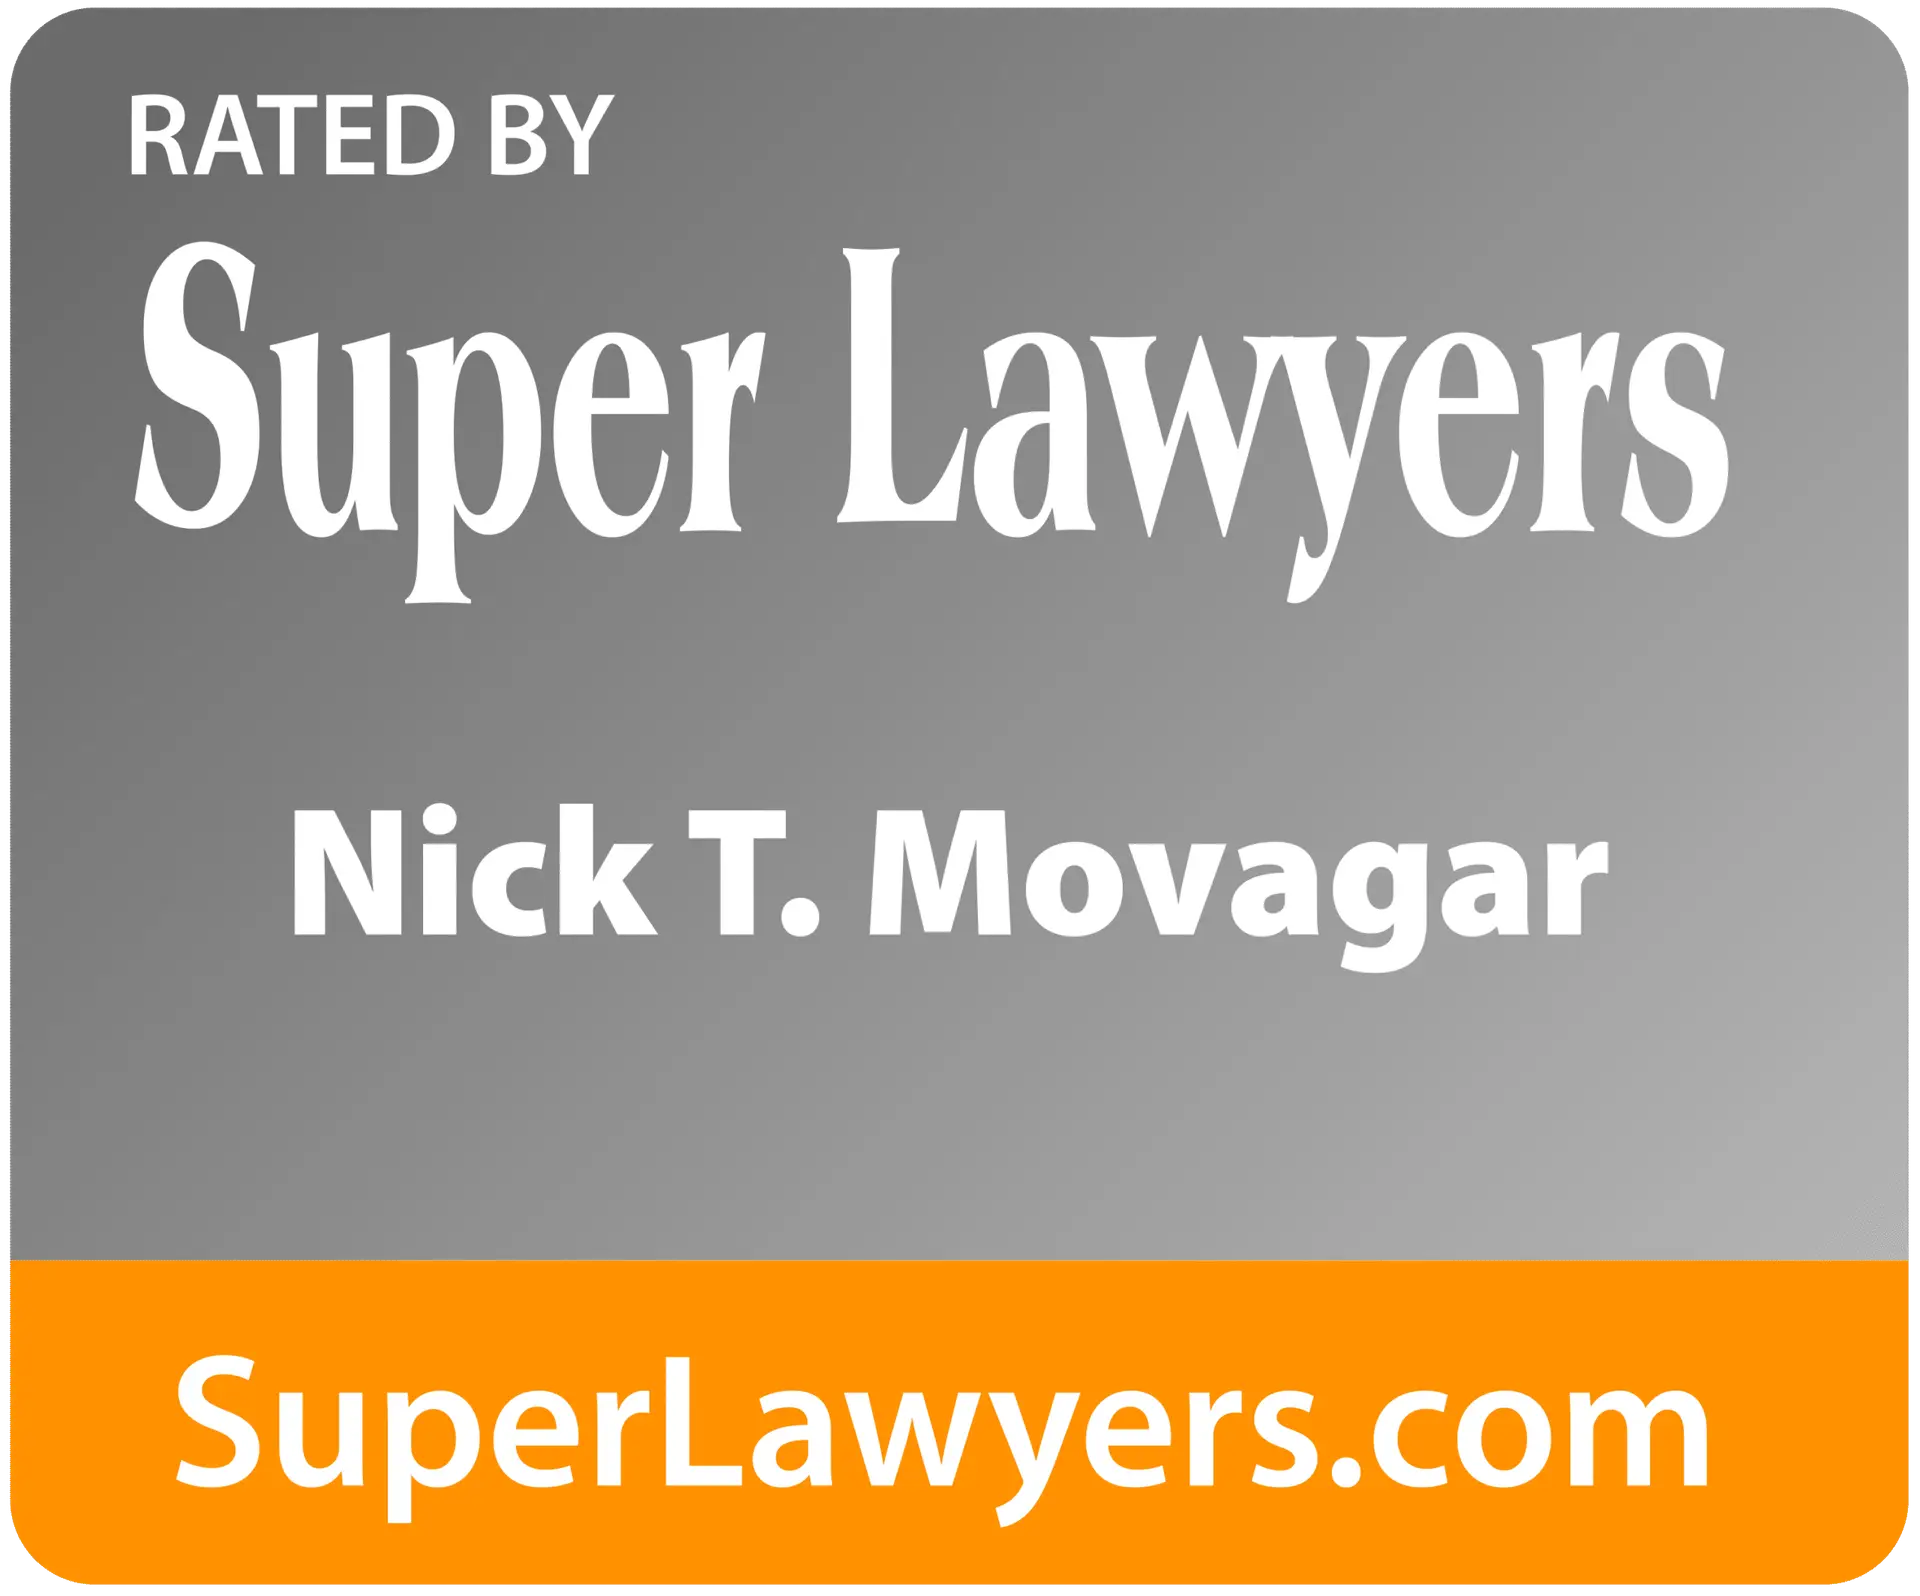 Super-Lawyers.png